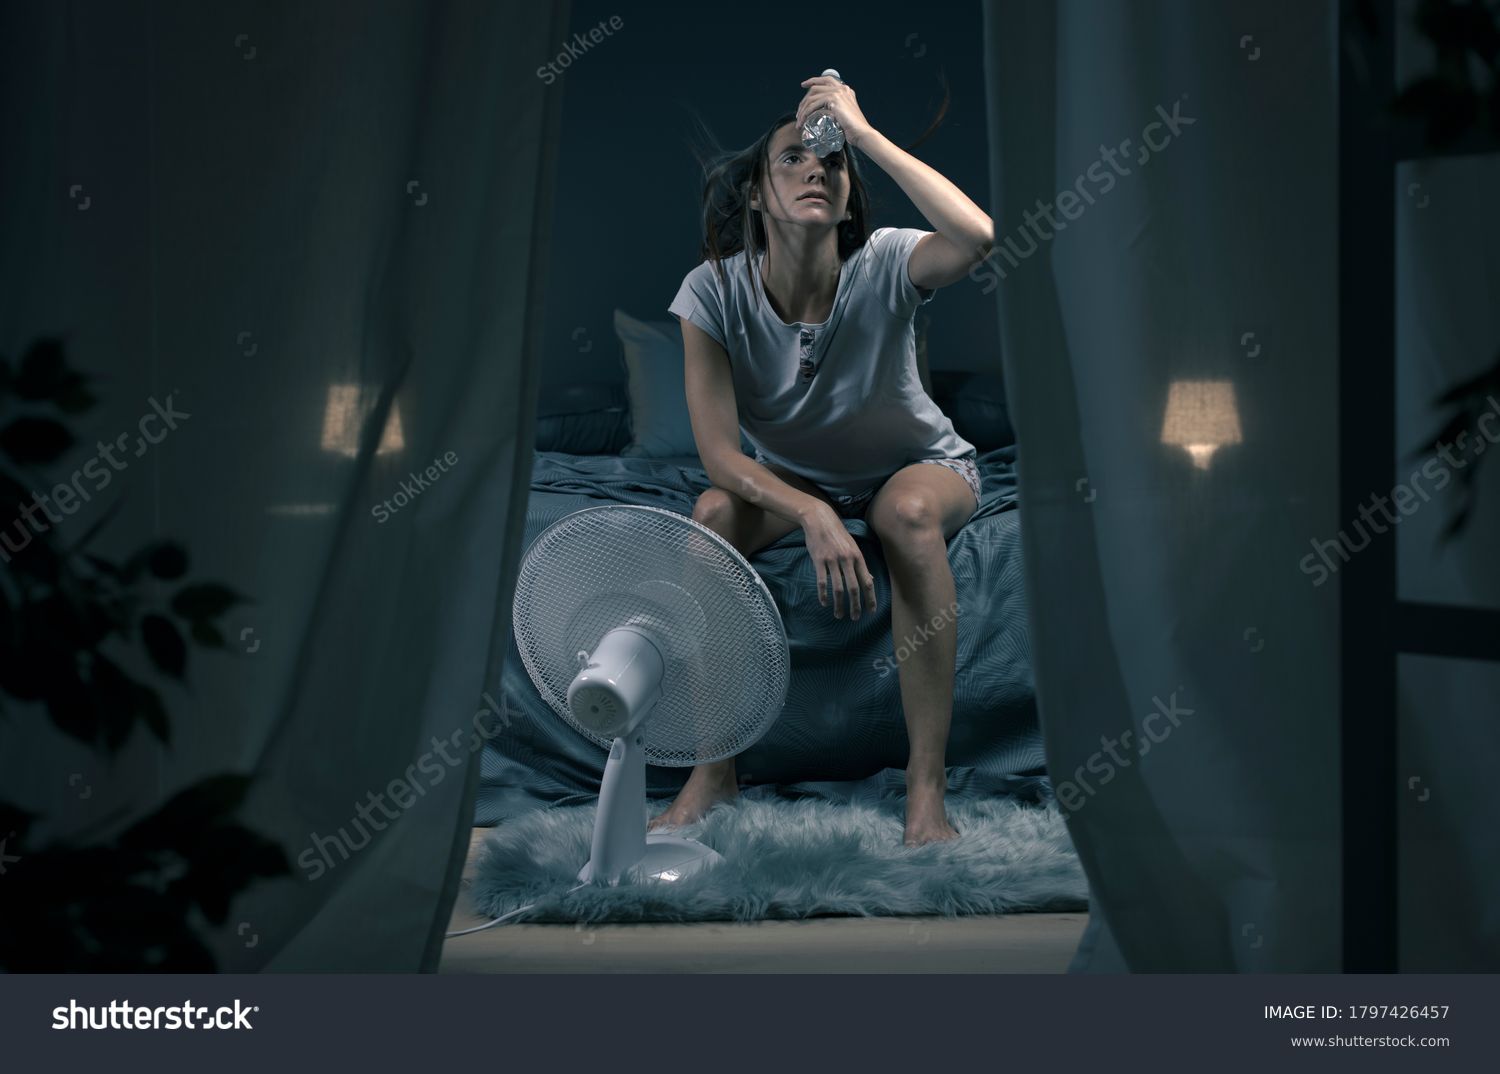 Exhausted woman suffering suring the heatwave, she is holding a water bottle and sitting in front of a cooling fan in the bedroom #1797426457